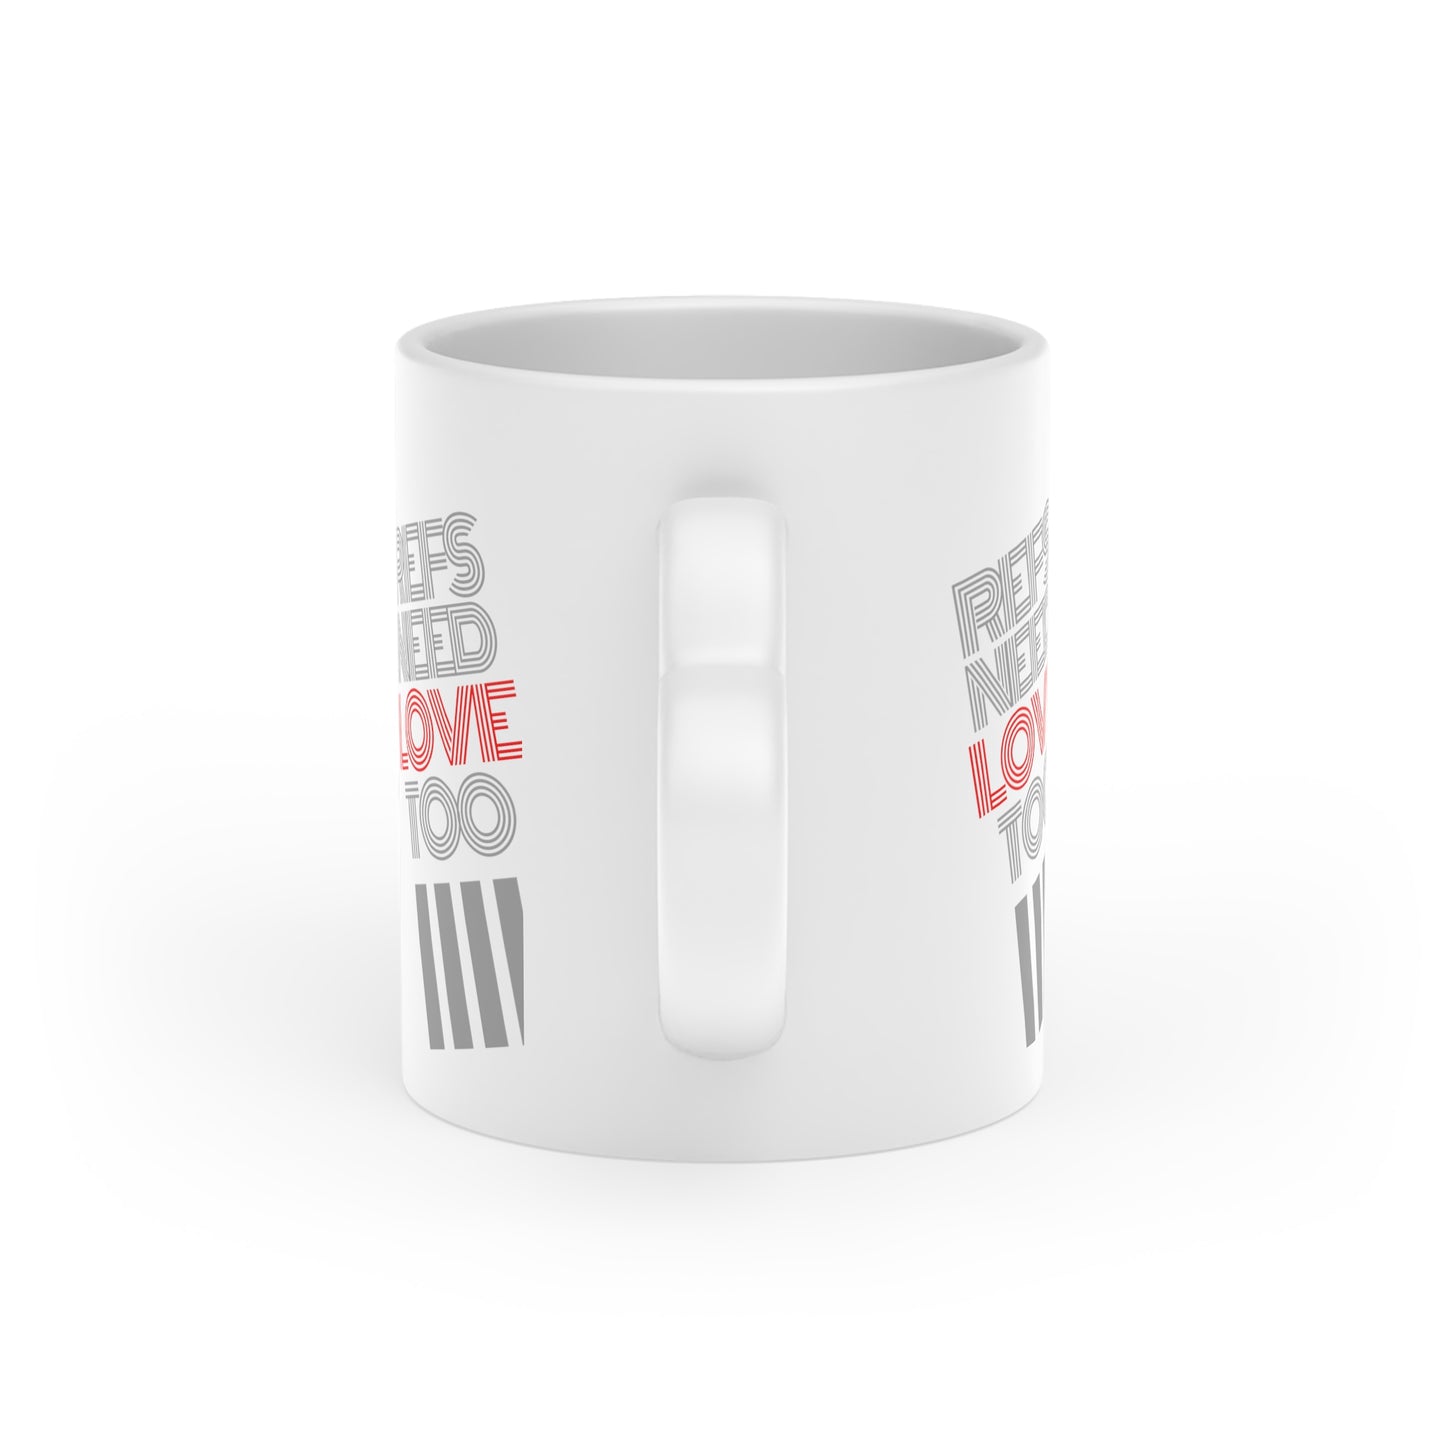 Refs Need Love Too Heart-Shaped Mug | Gift for Referees | White 11 oz. Coffee cup | Referee Gift | Mug for tea or cocoa